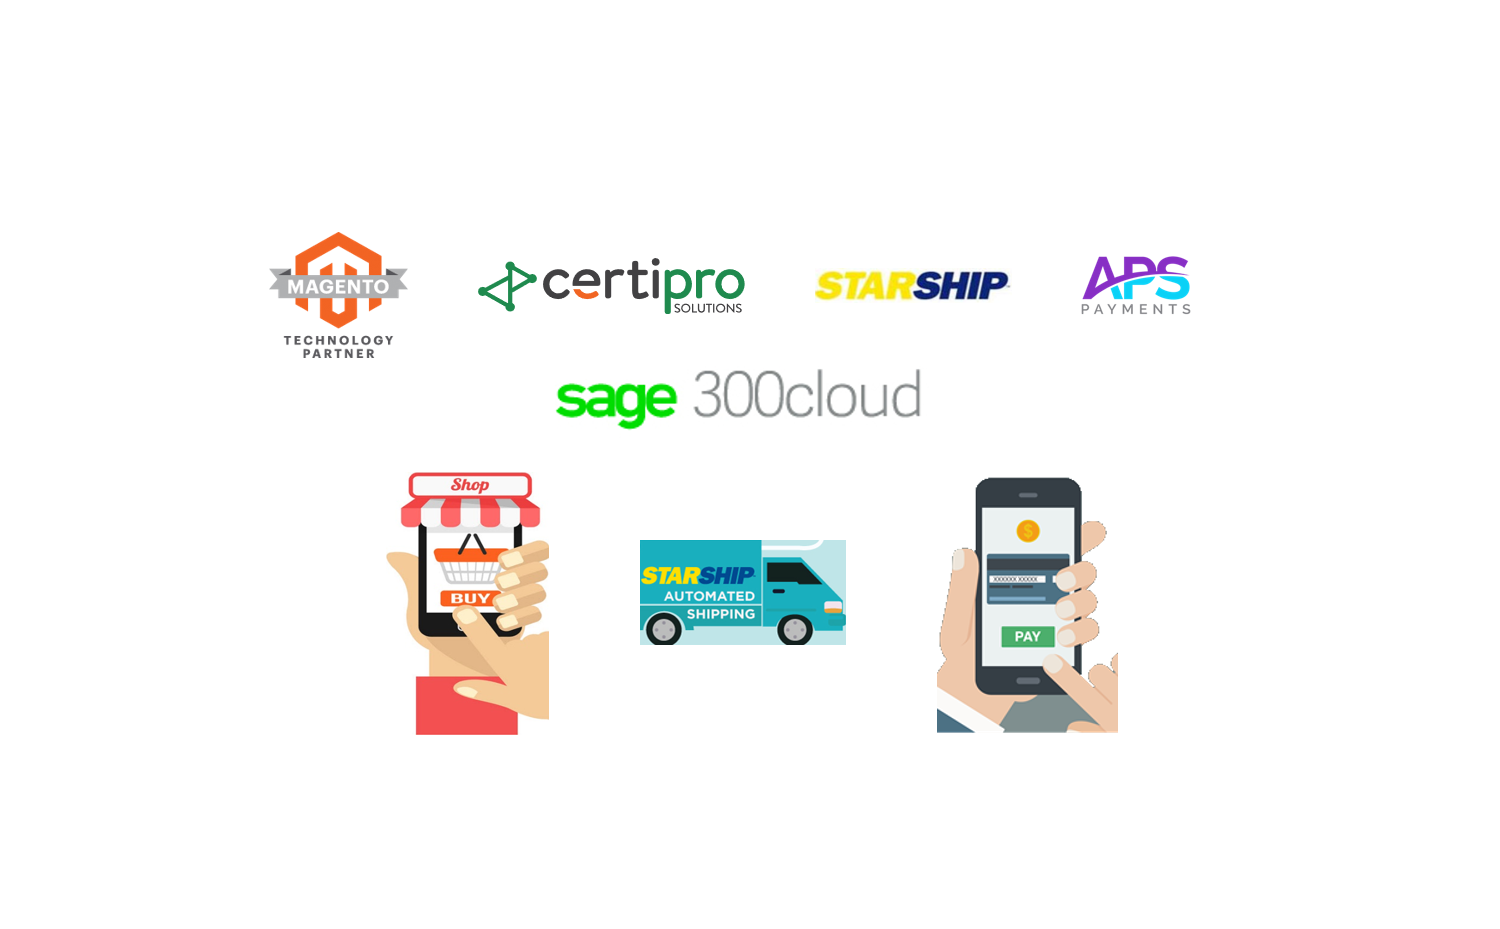 Sage 300cloud: Integrated Magento eCommerce Shipping and Payments